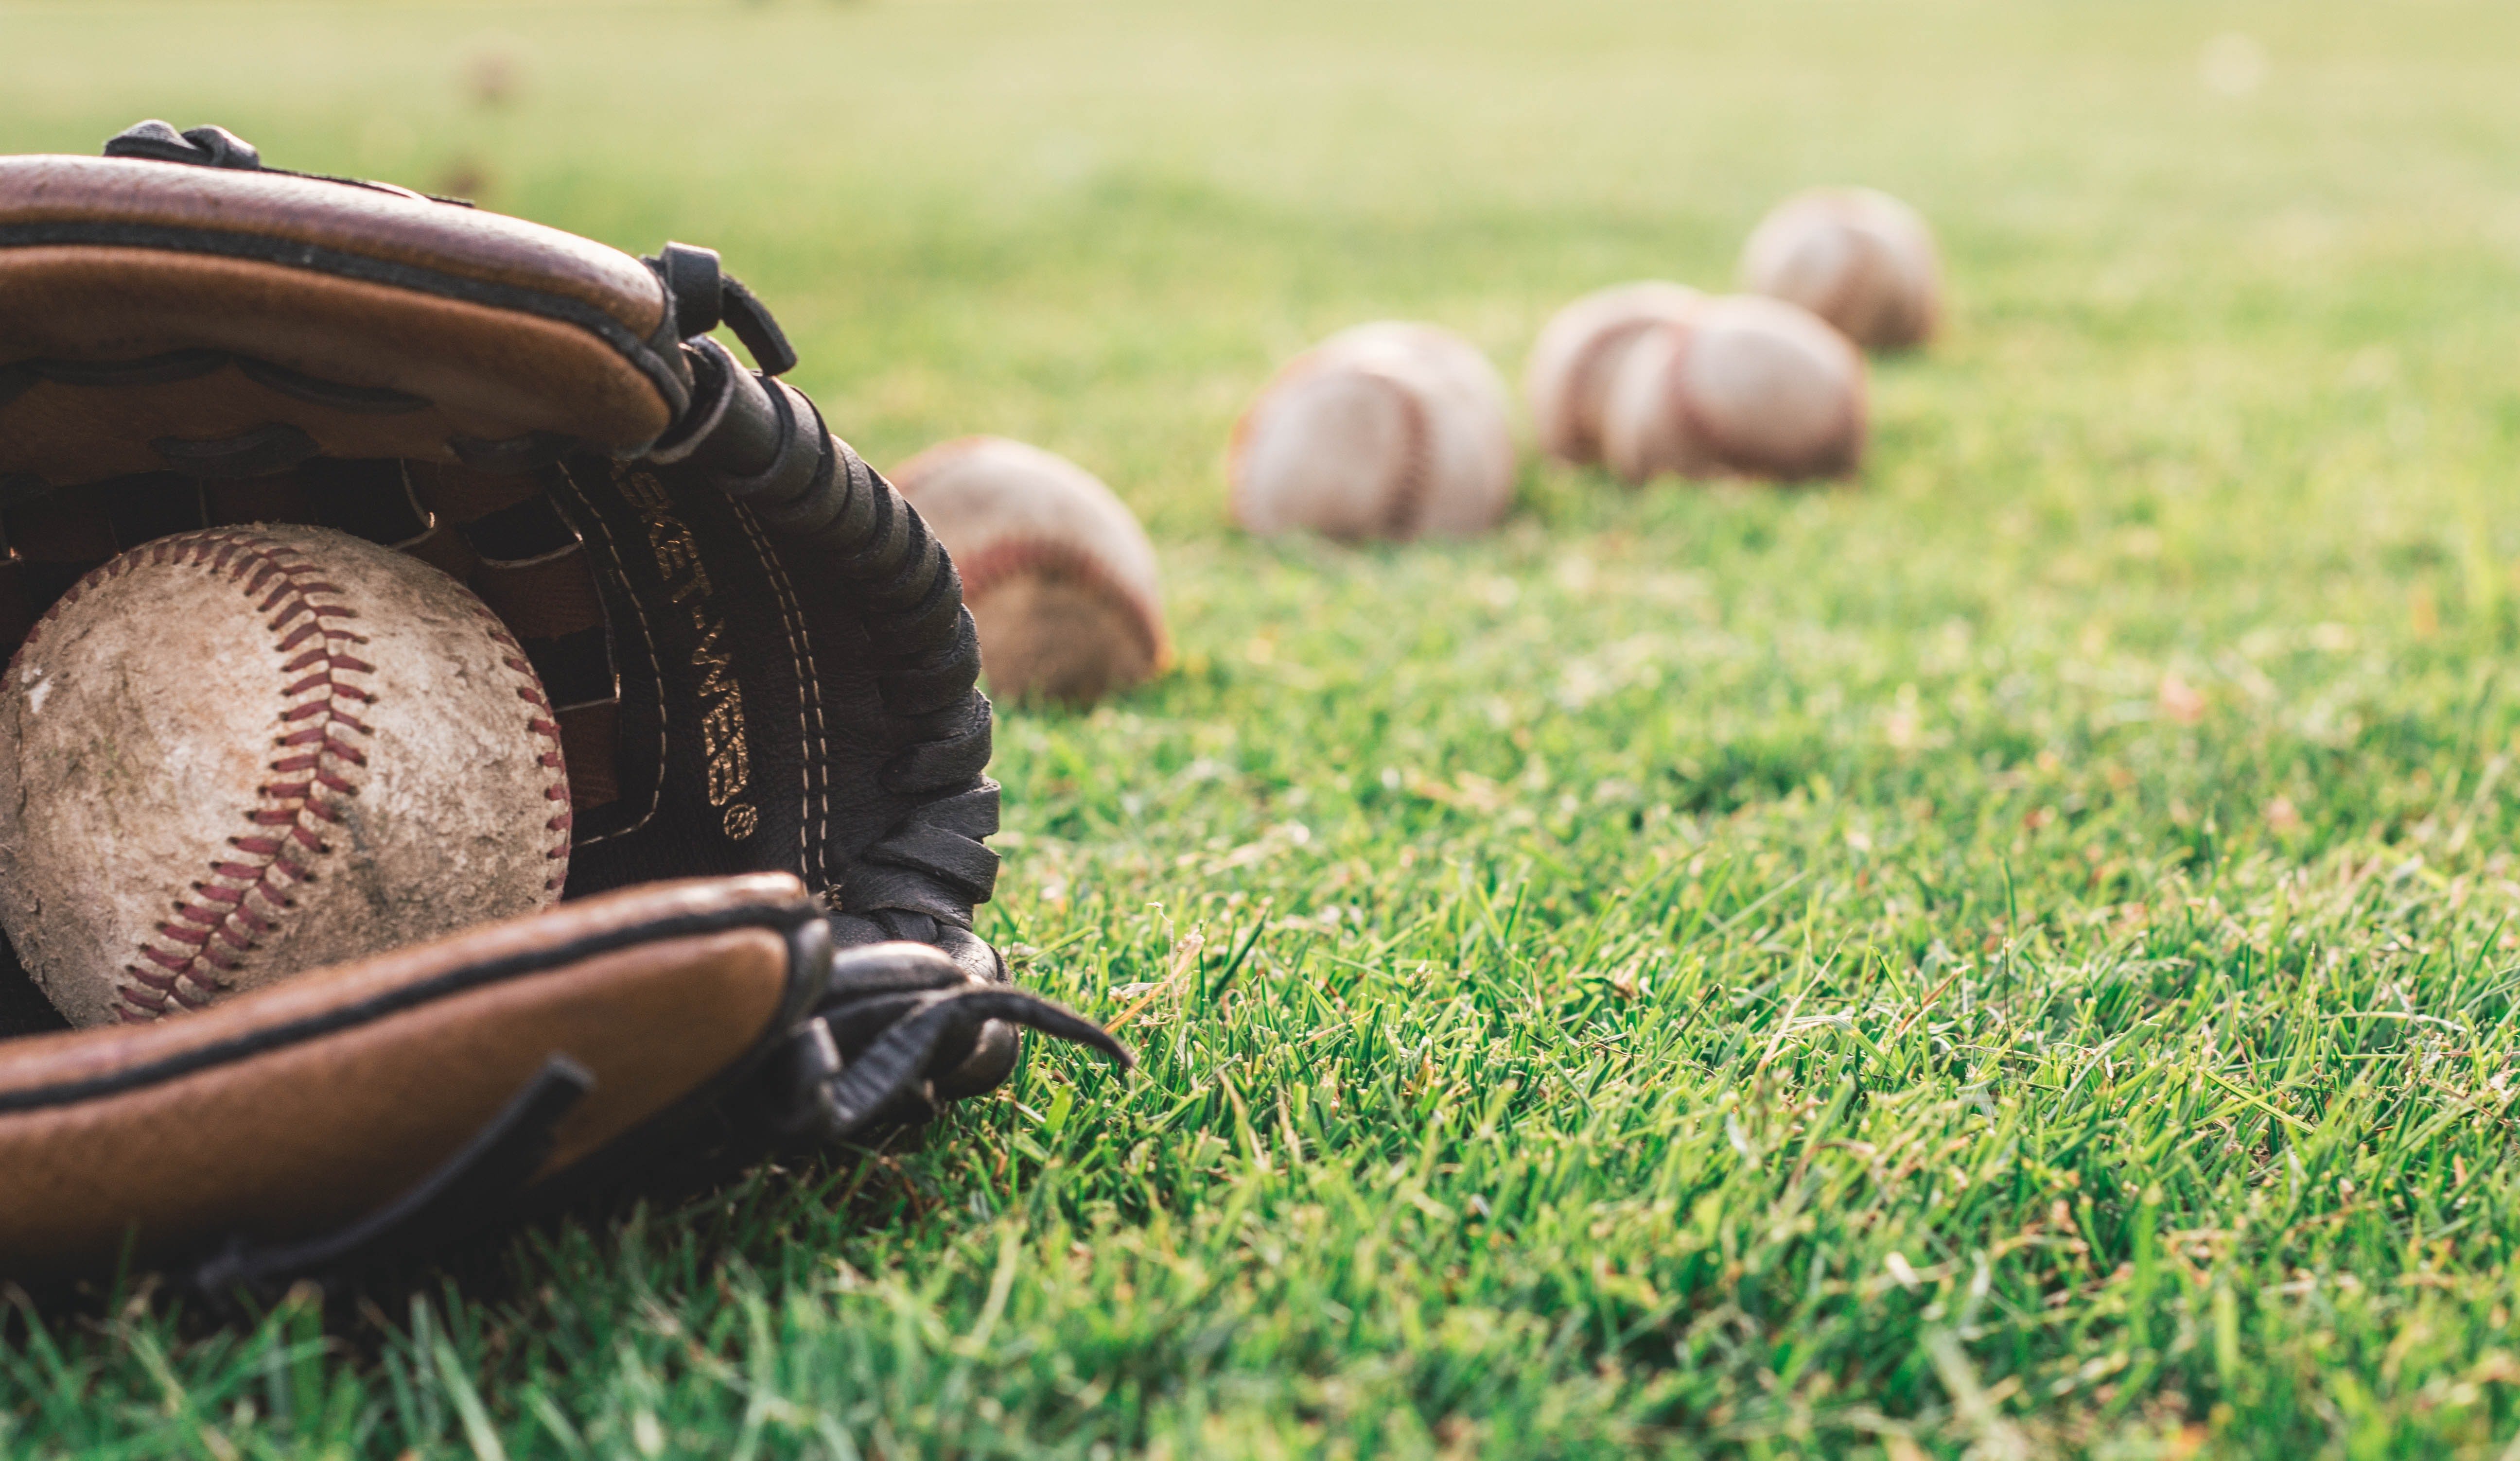 A group of kids would play baseball at the park every afternoon. | Source: Pexels